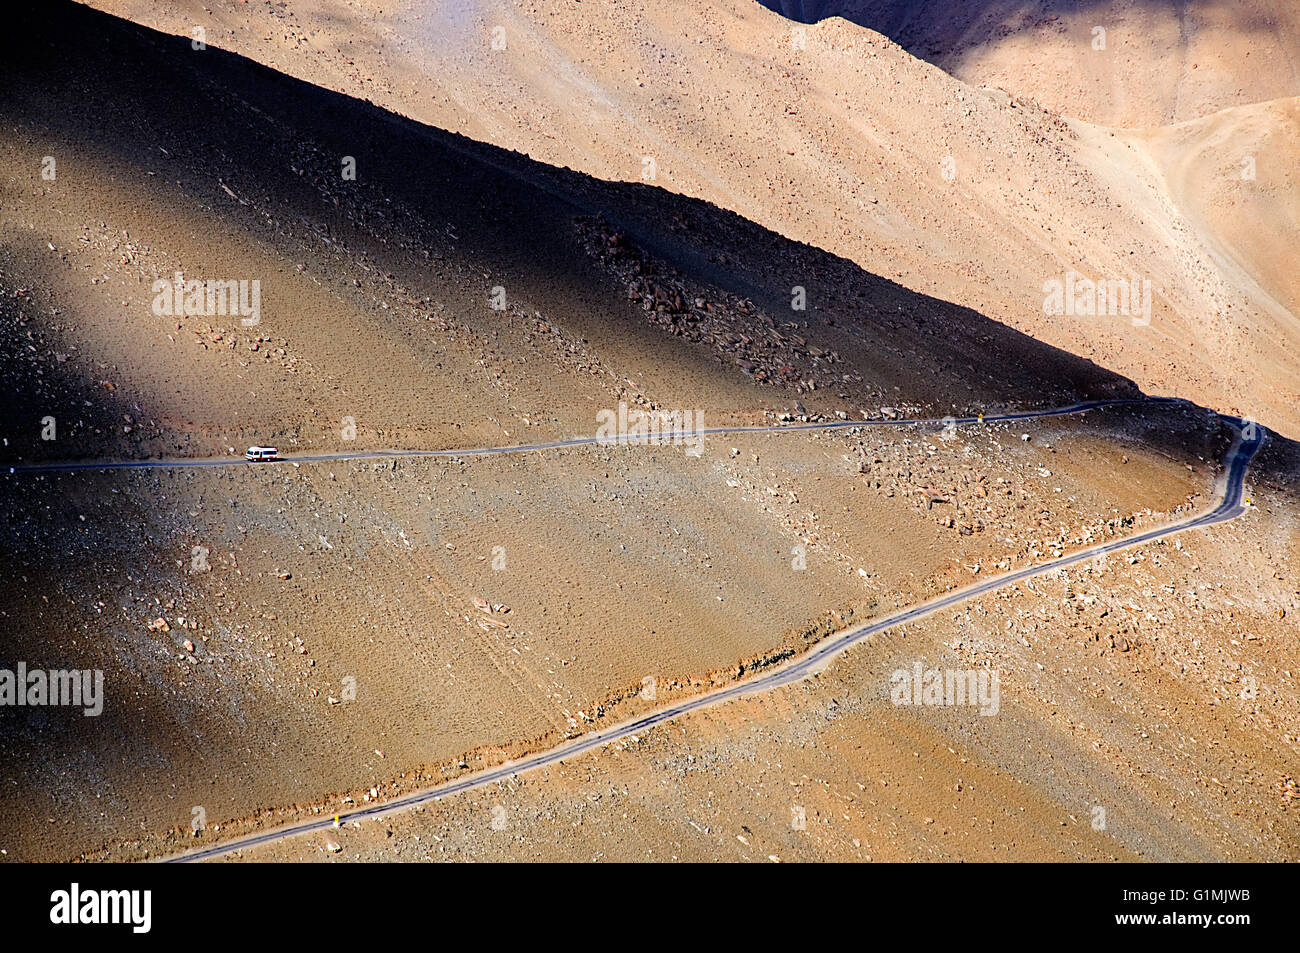 A mountain in Ladakh, India with shadows, light and road carved out upon it Stock Photo